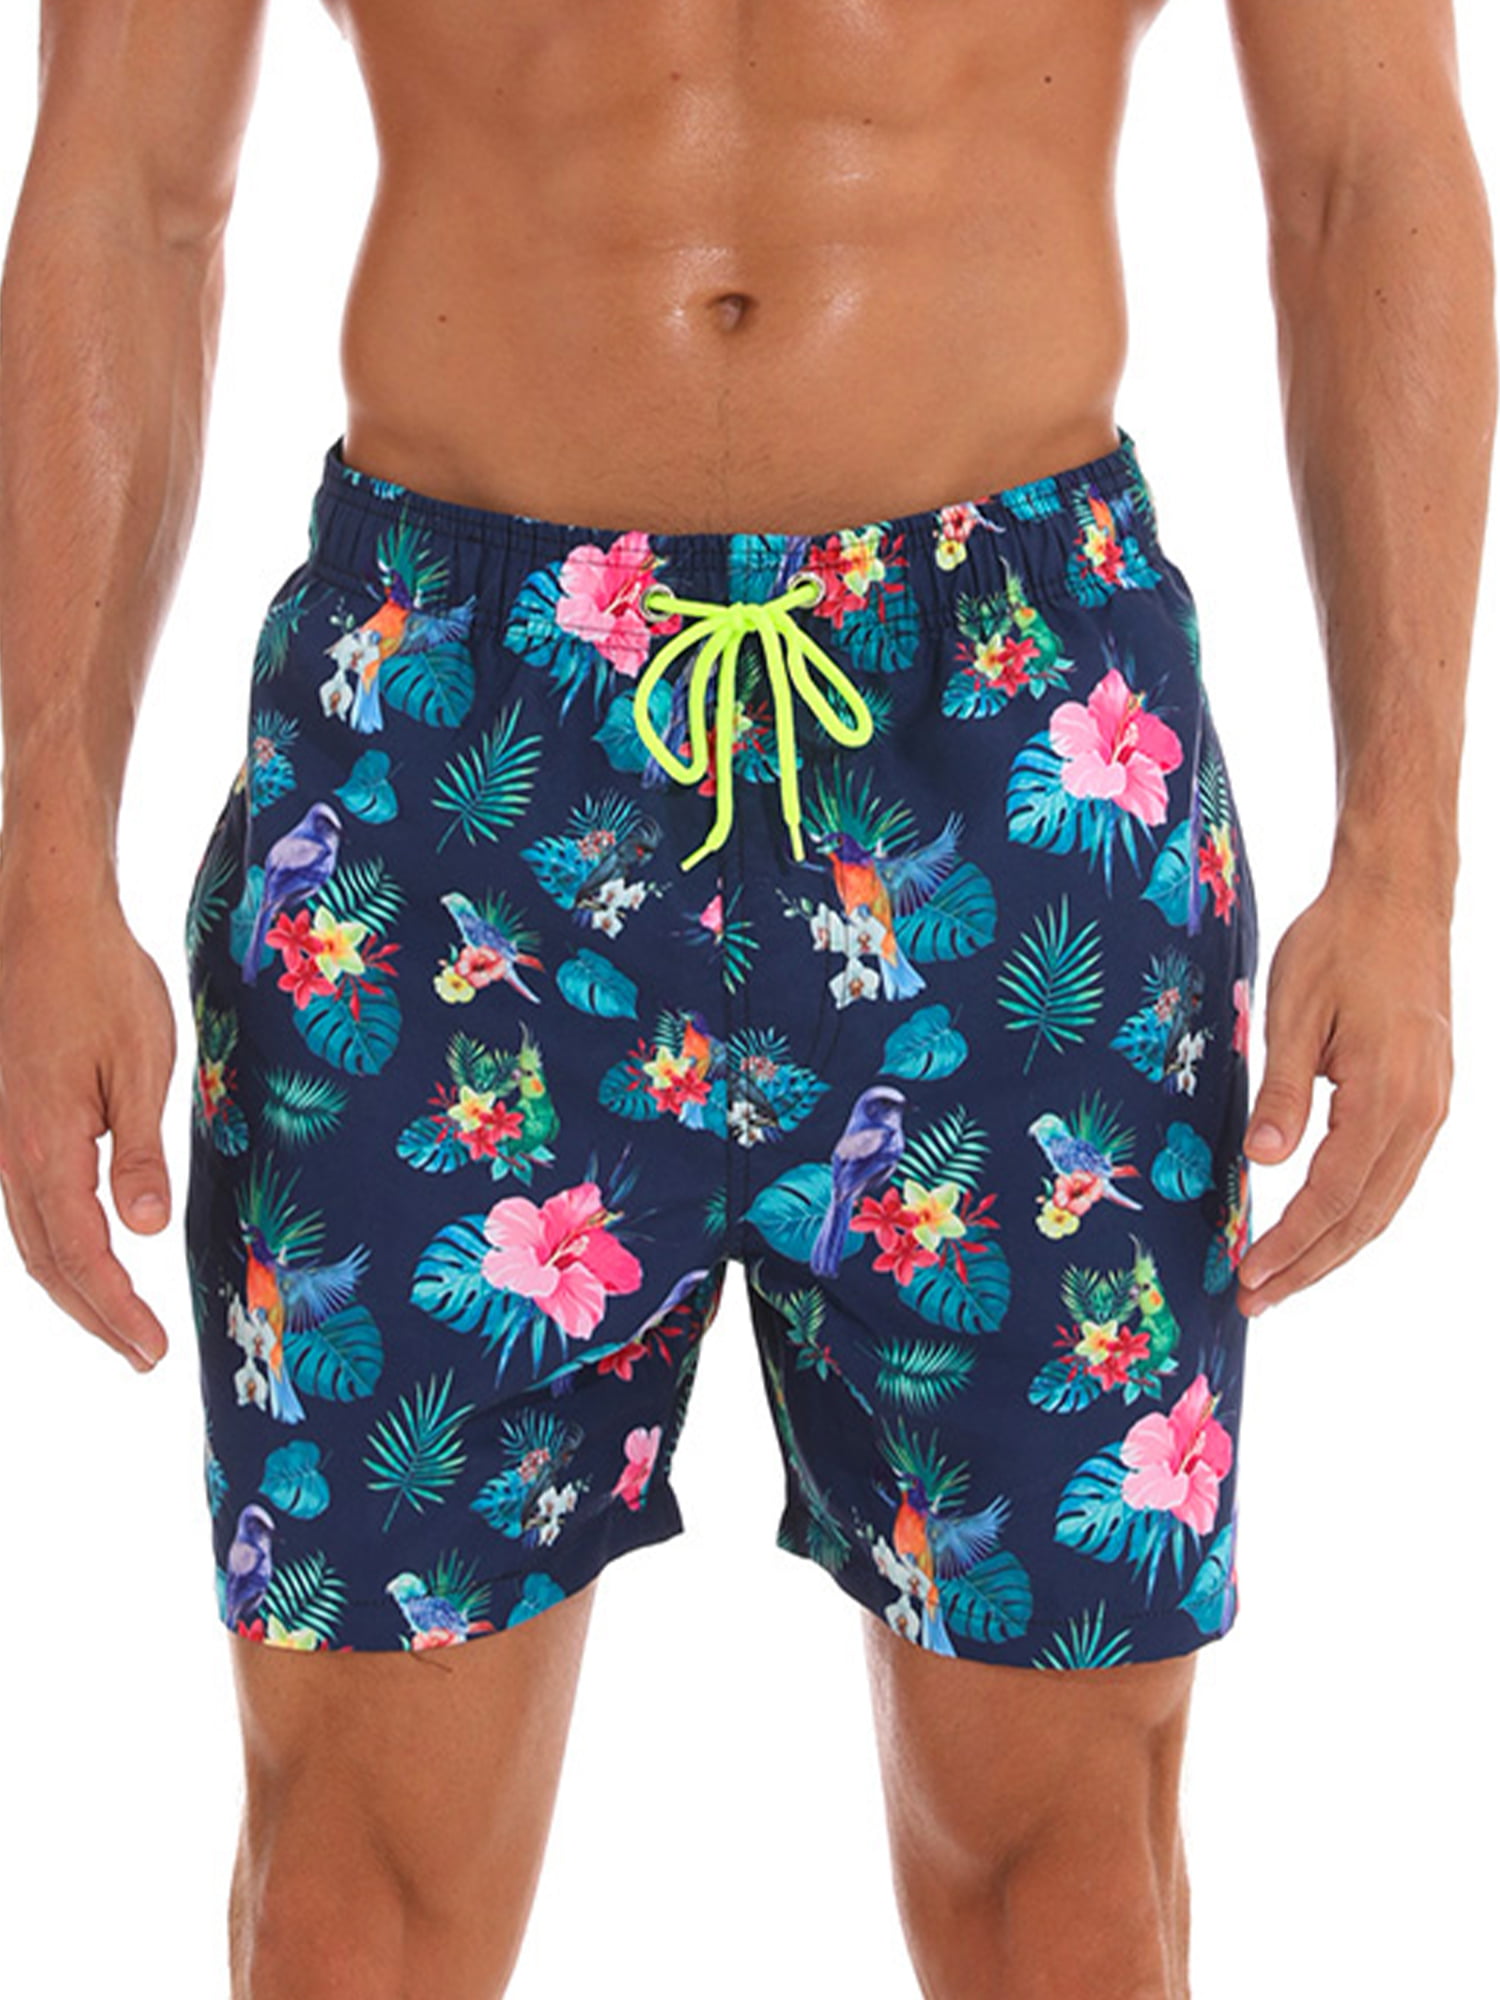 Husky Dog Mens Beach Shorts Casual Swimming Trunks with 3 Pockets